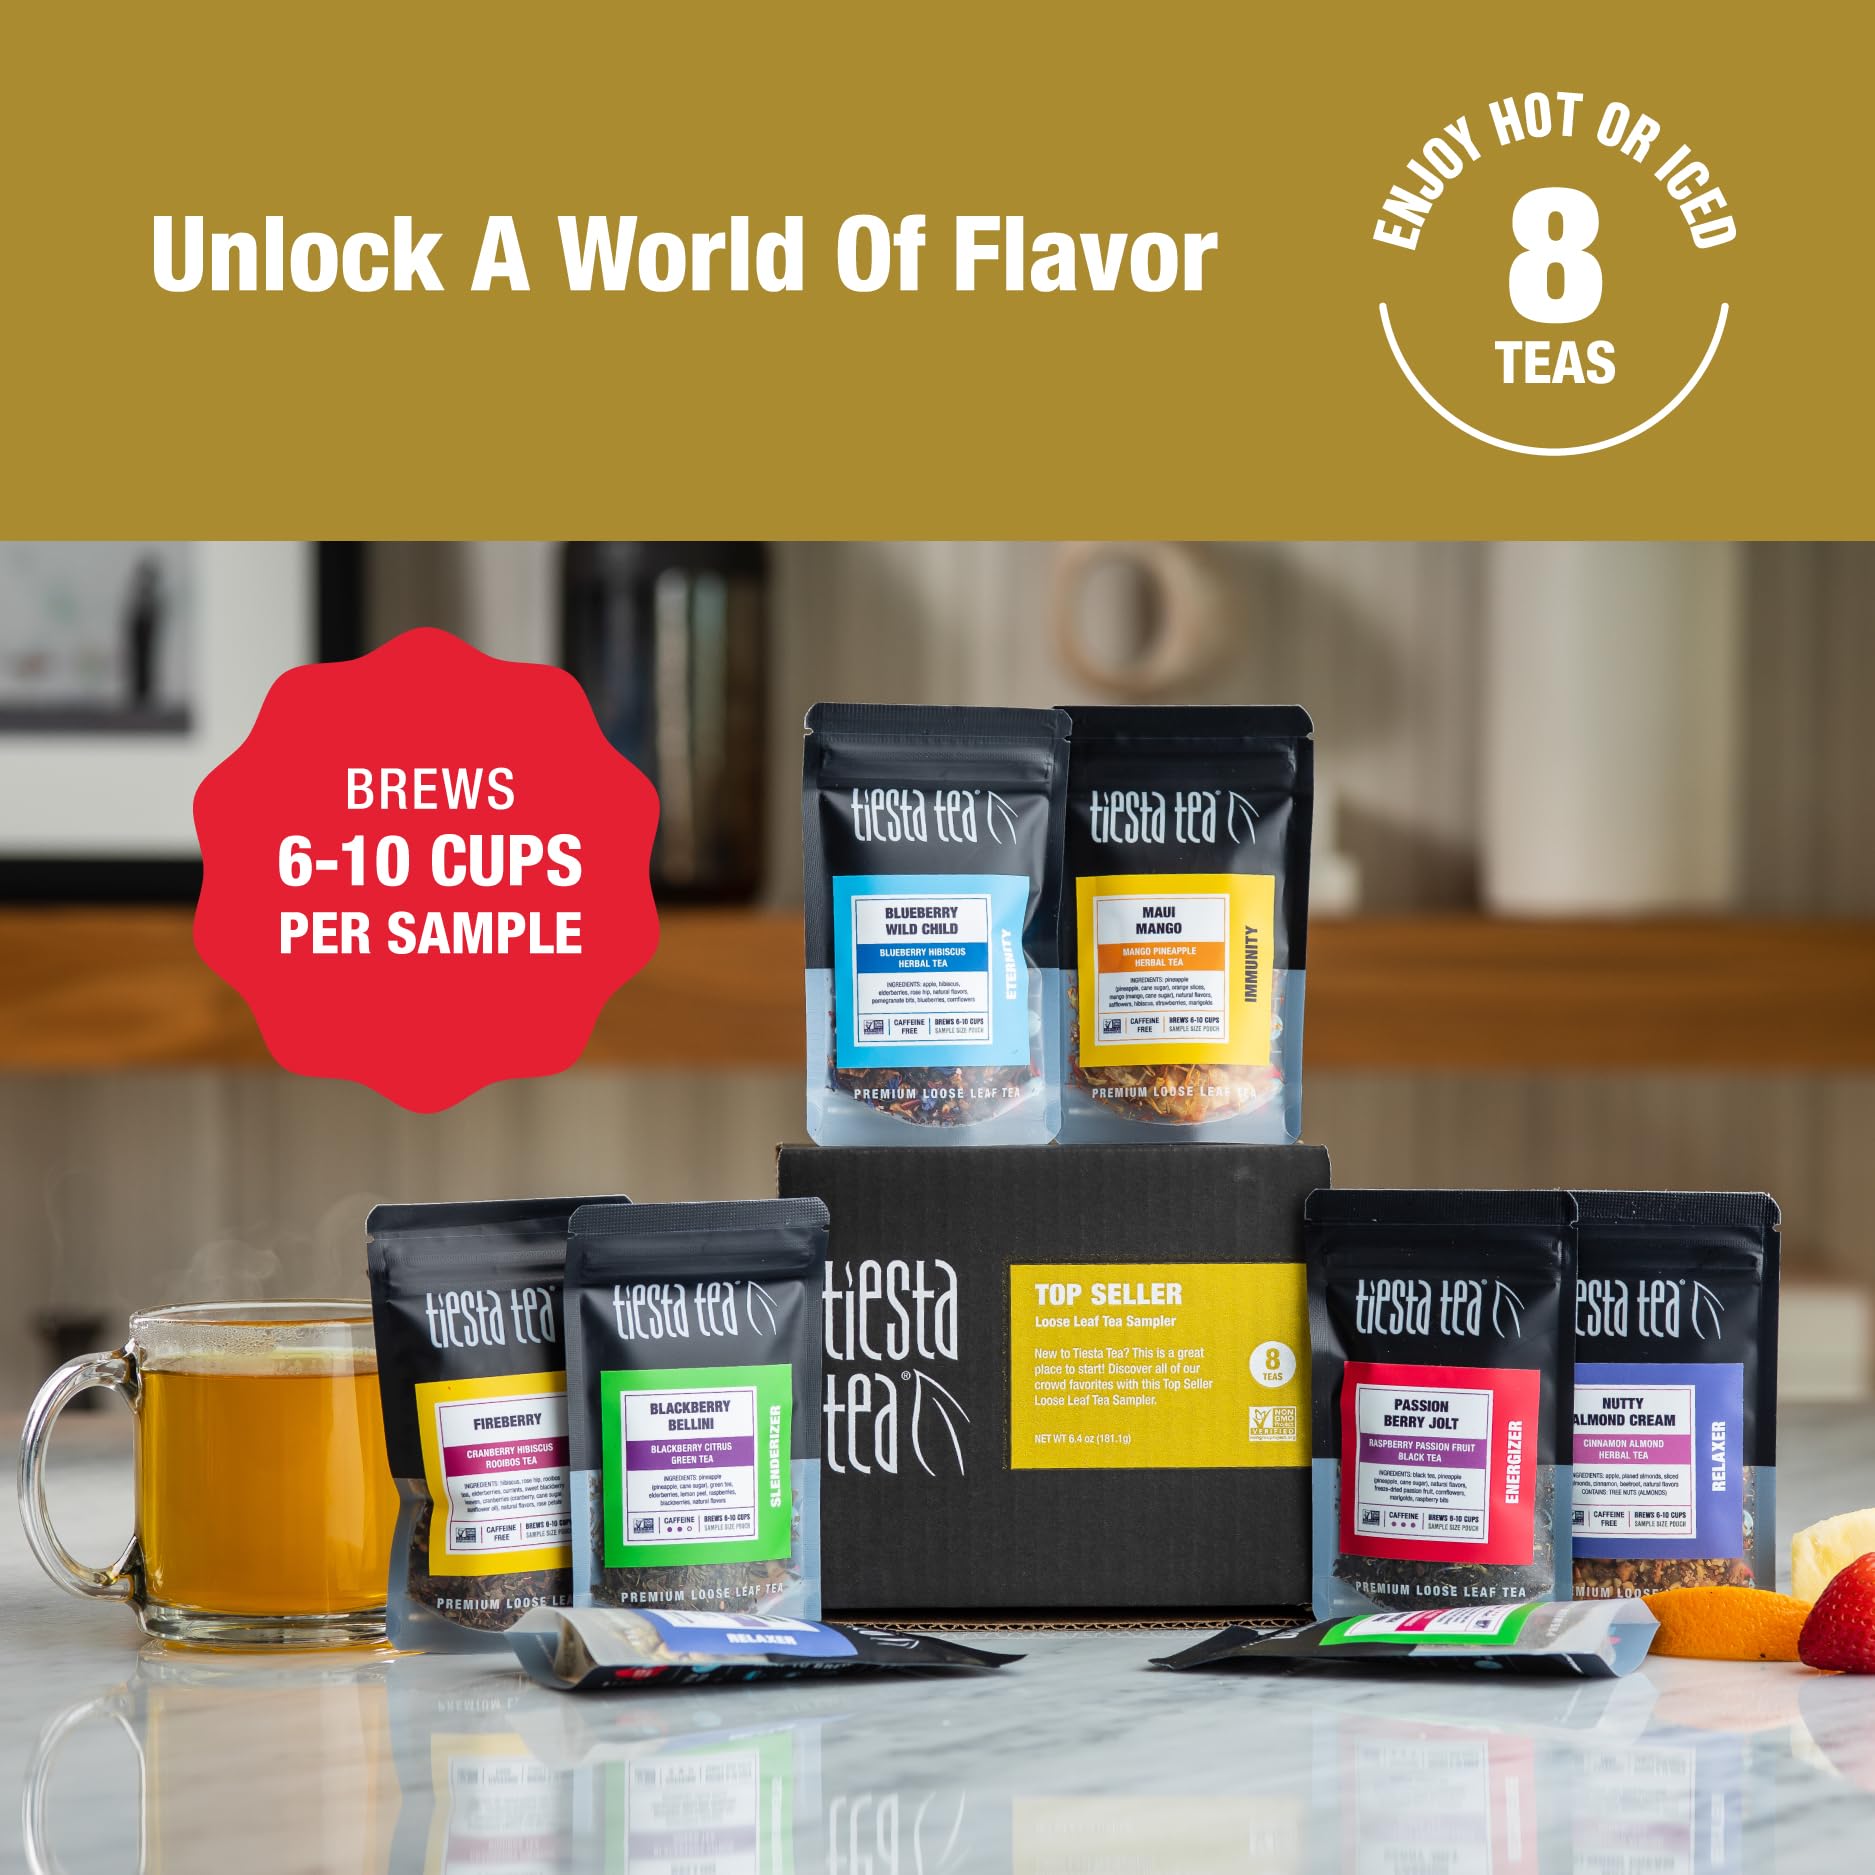 Tiesta Tea Top 8 Favorites Sampler Set, Up to 80 Cups, High to No Caffeine, Hot & Iced Tea, Loose Leaf Tea Variety Pack with Green, Herbal, Black & Chai Tea, 8 Sample Pouches